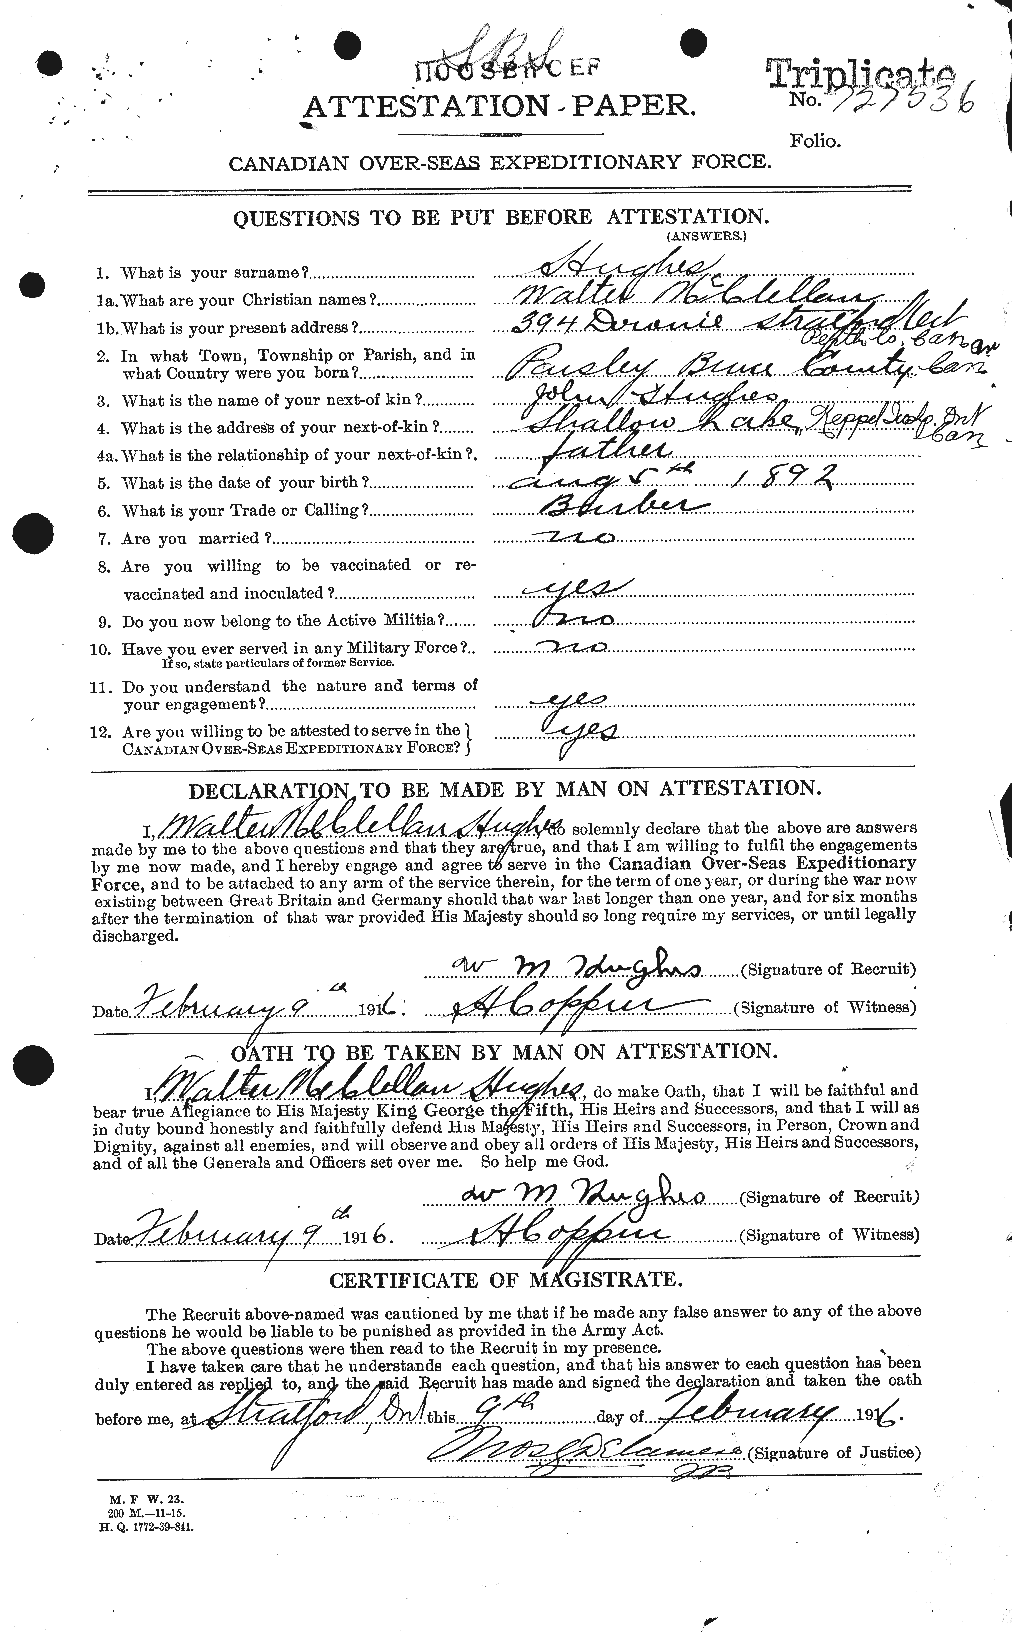 Personnel Records of the First World War - CEF 405863a